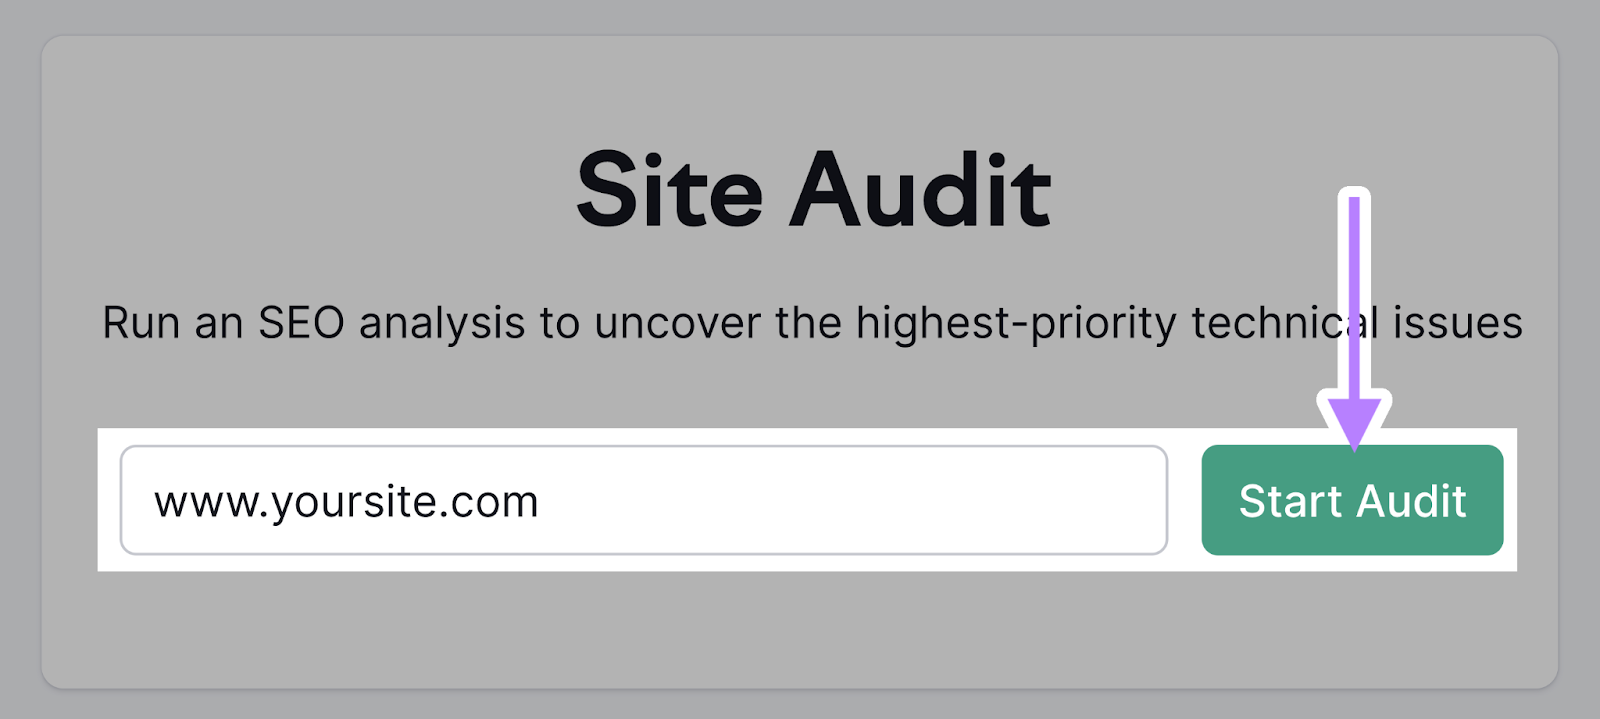 A search for "www.yoursite.com" in Semrush's Site Audit tool. There's an arrow to the "Start Audit" button.